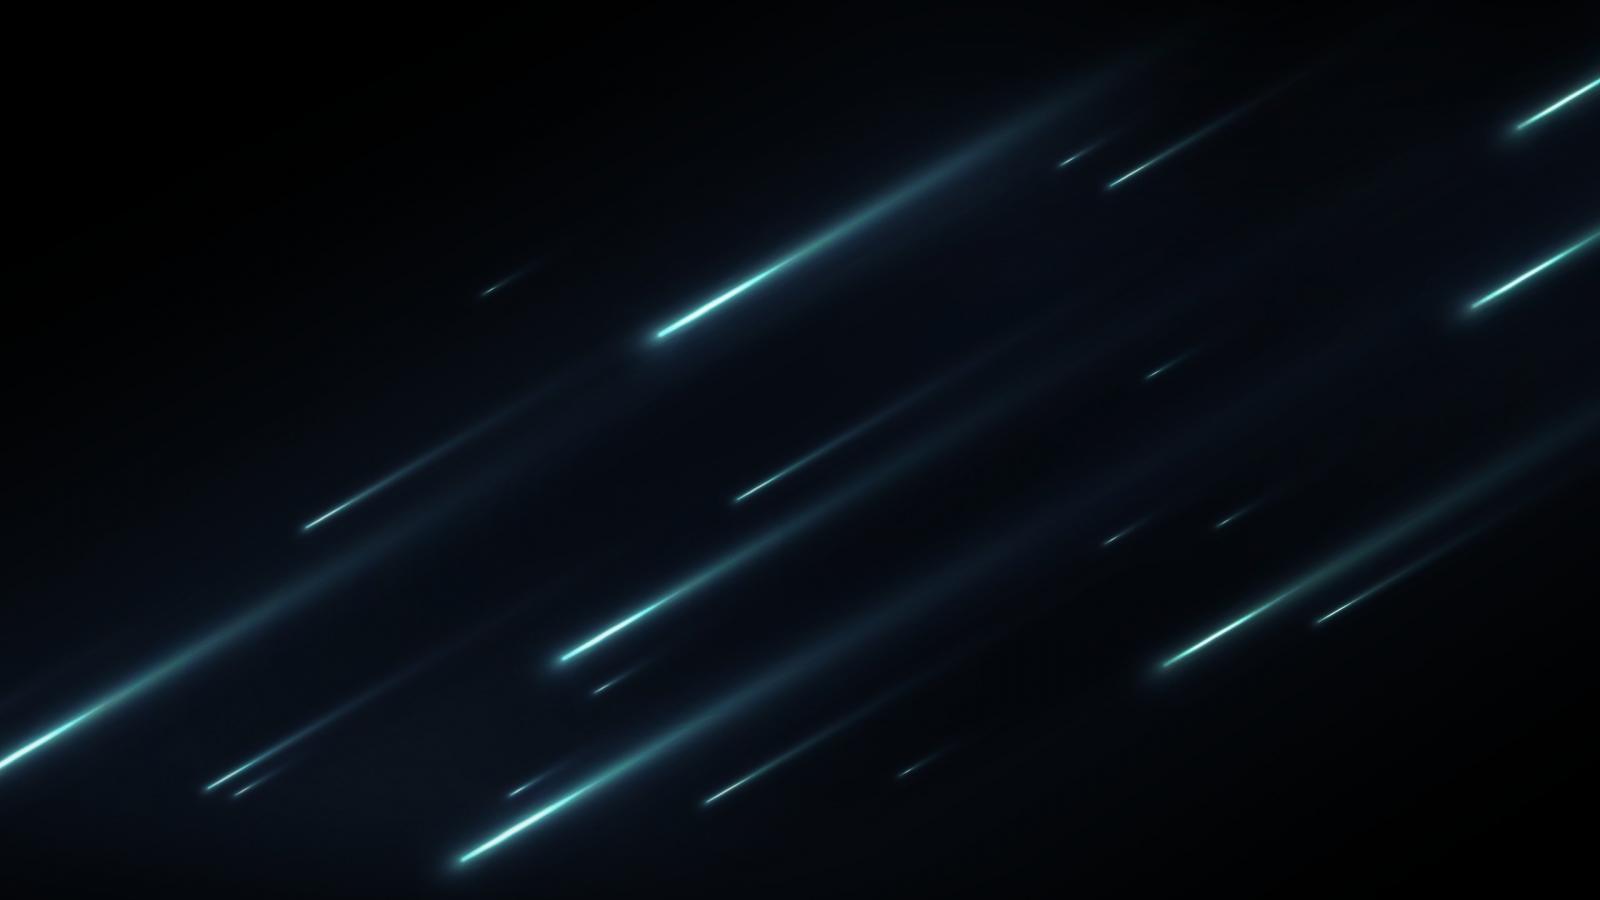 Awesome Black themed abstract wallpaper in HD Design Utopia